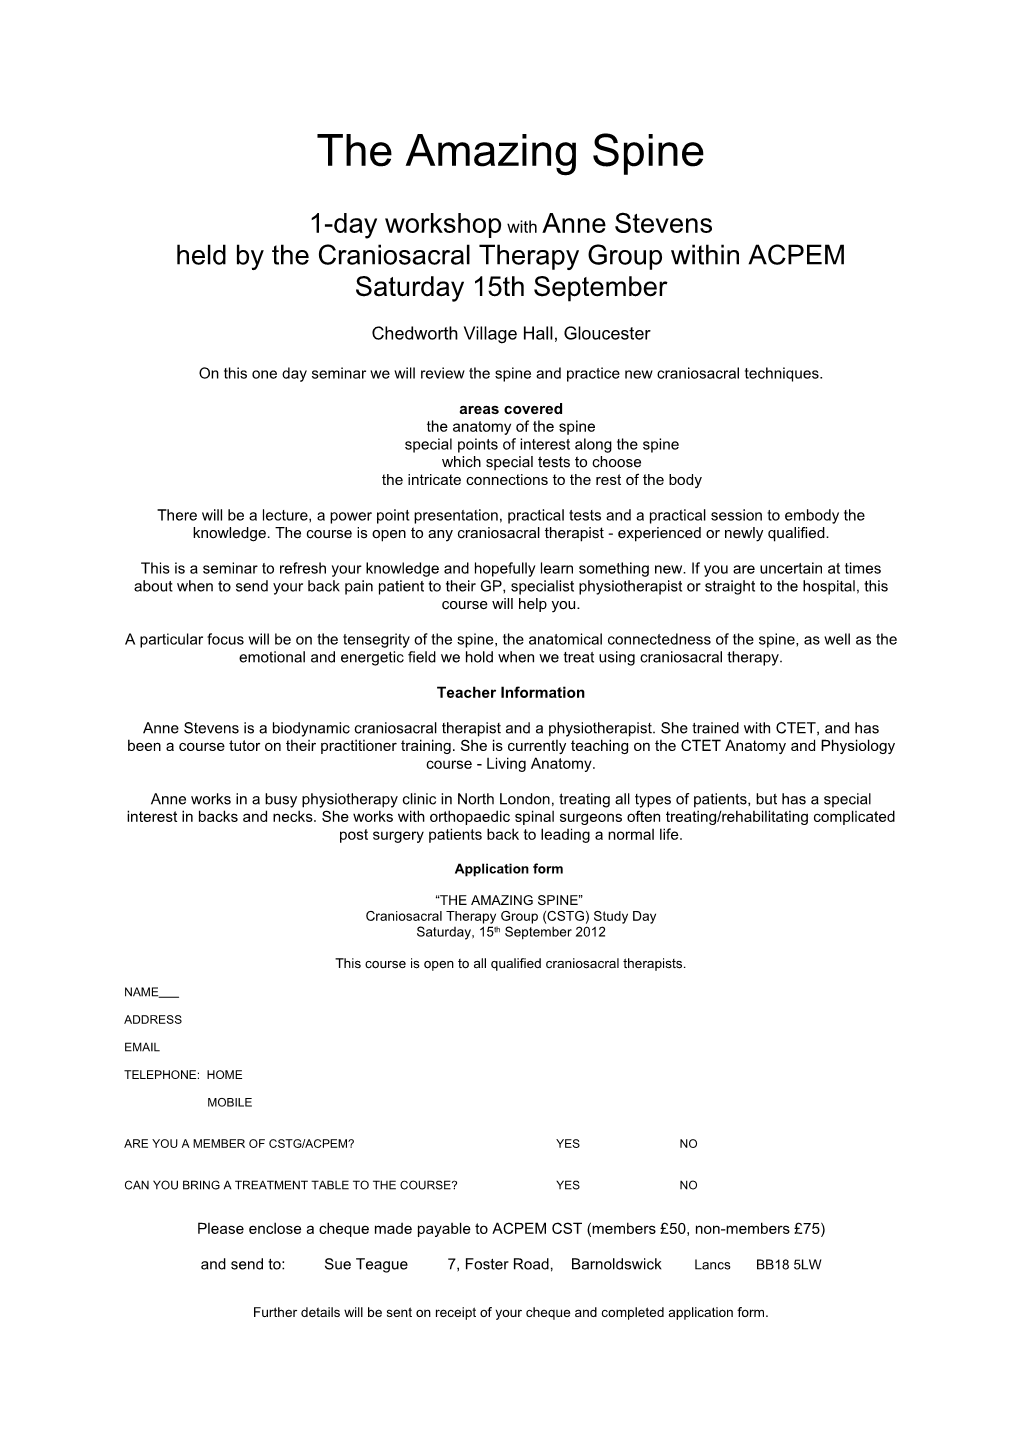 Held by the Craniosacral Therapy Group Within ACPEM